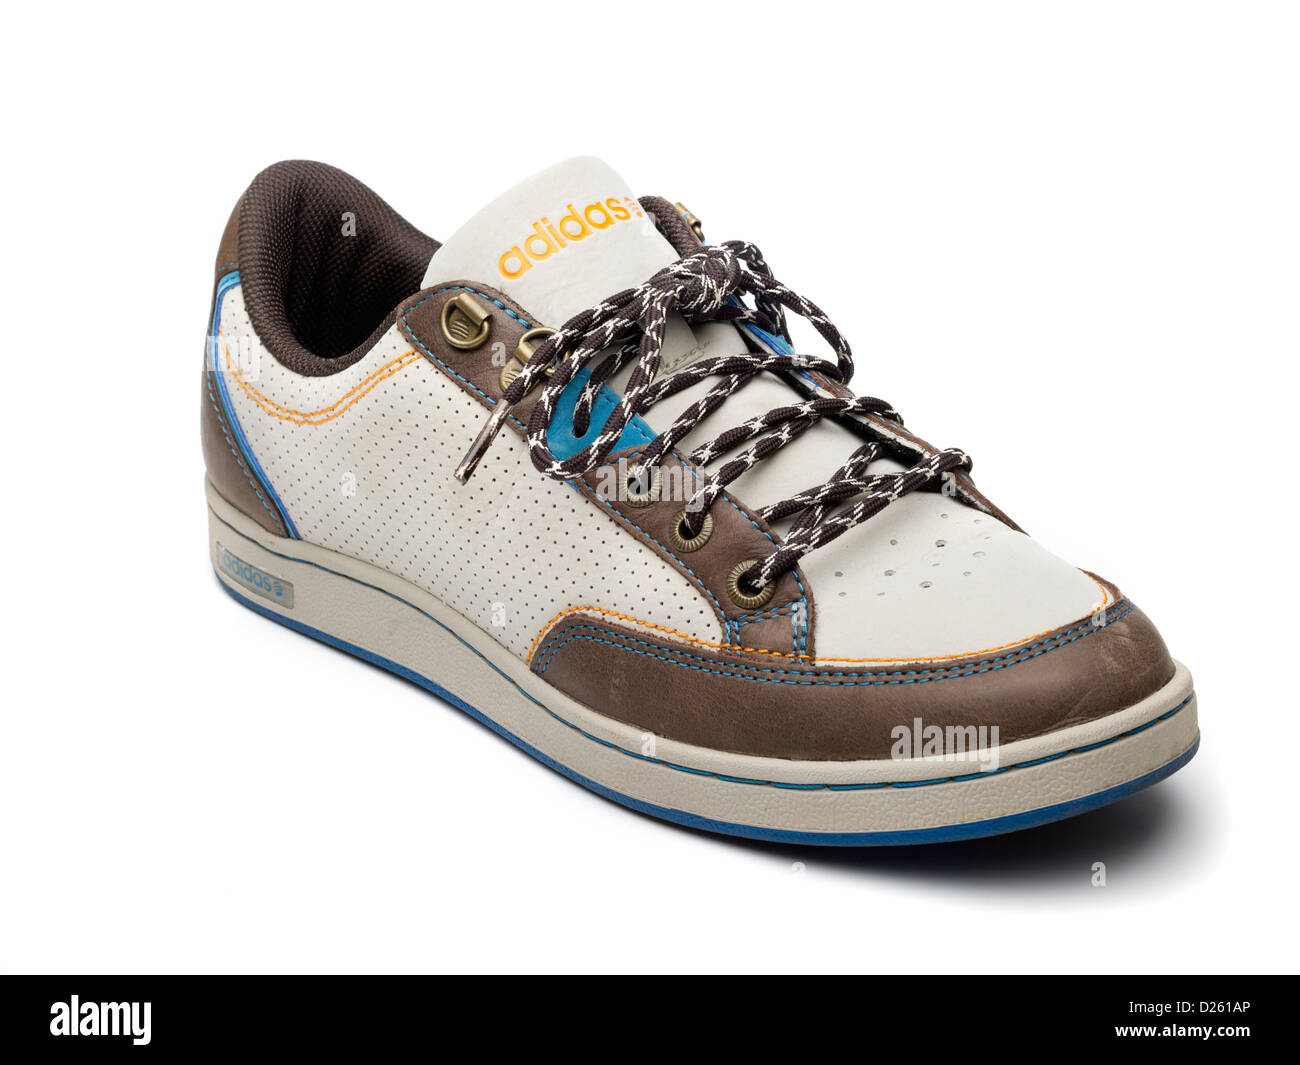 Adidas Shoe High Resolution Stock Photography and Images - Alamy